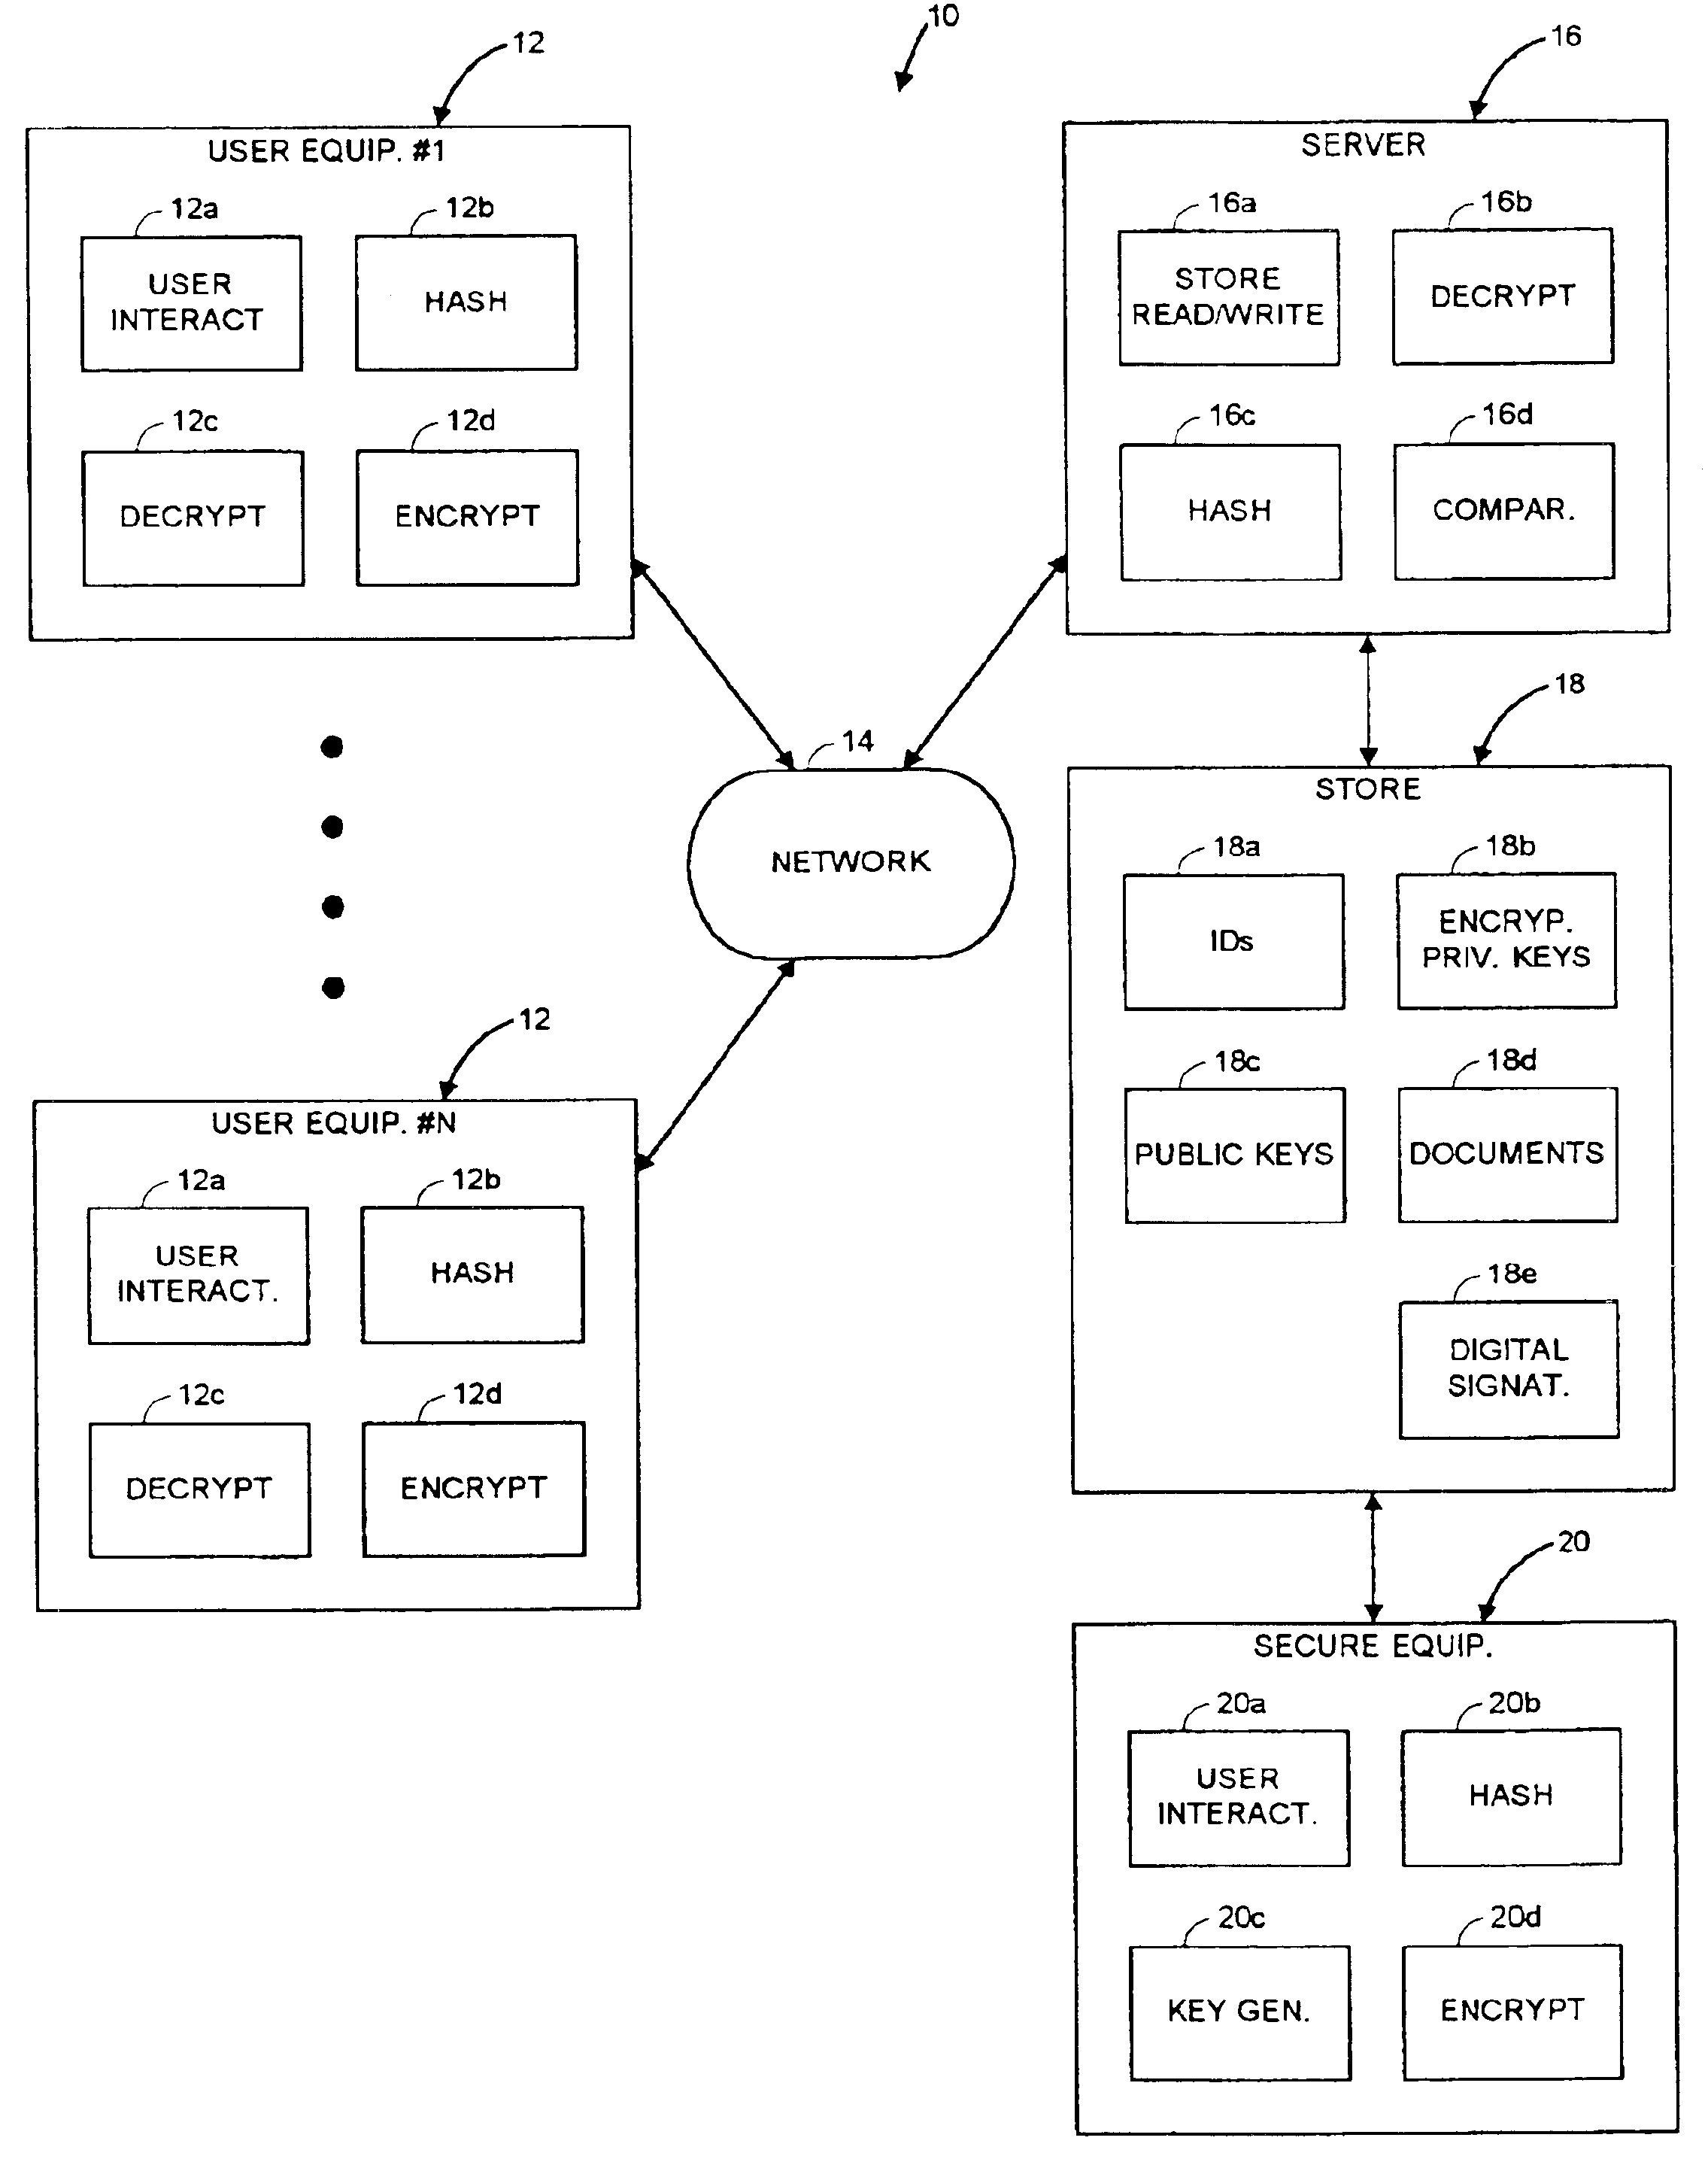 Administration and utilization of private keys in a networked environment